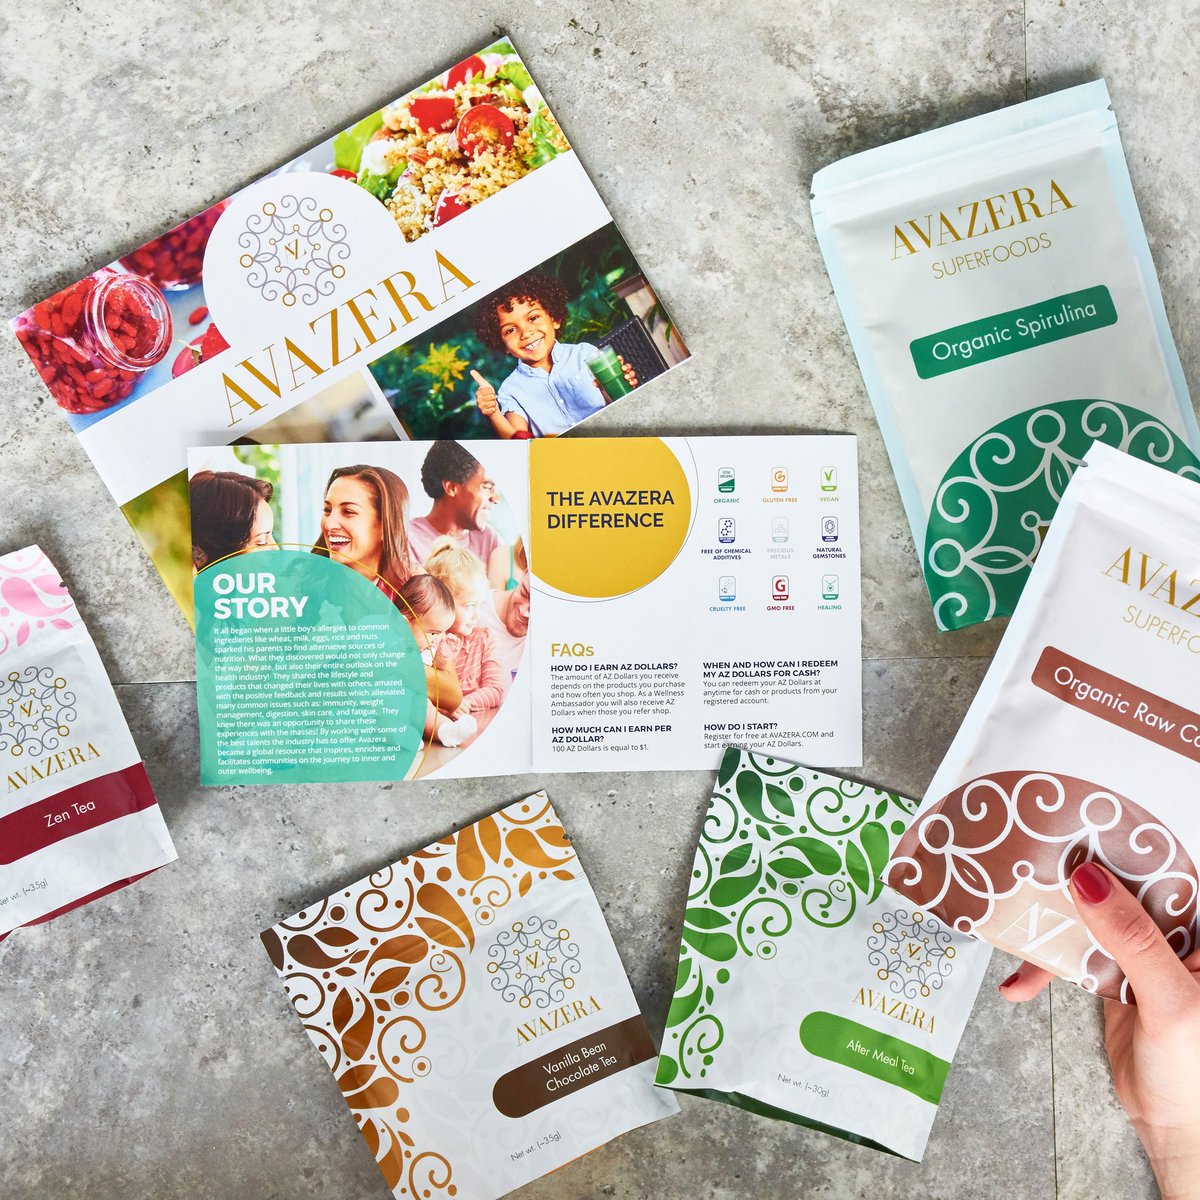 Start your 2017 off strong by becoming an #Avazera #WellnessAmbassador with our Wellness Starter Kit! Join today 👉 avazera.com/join-us